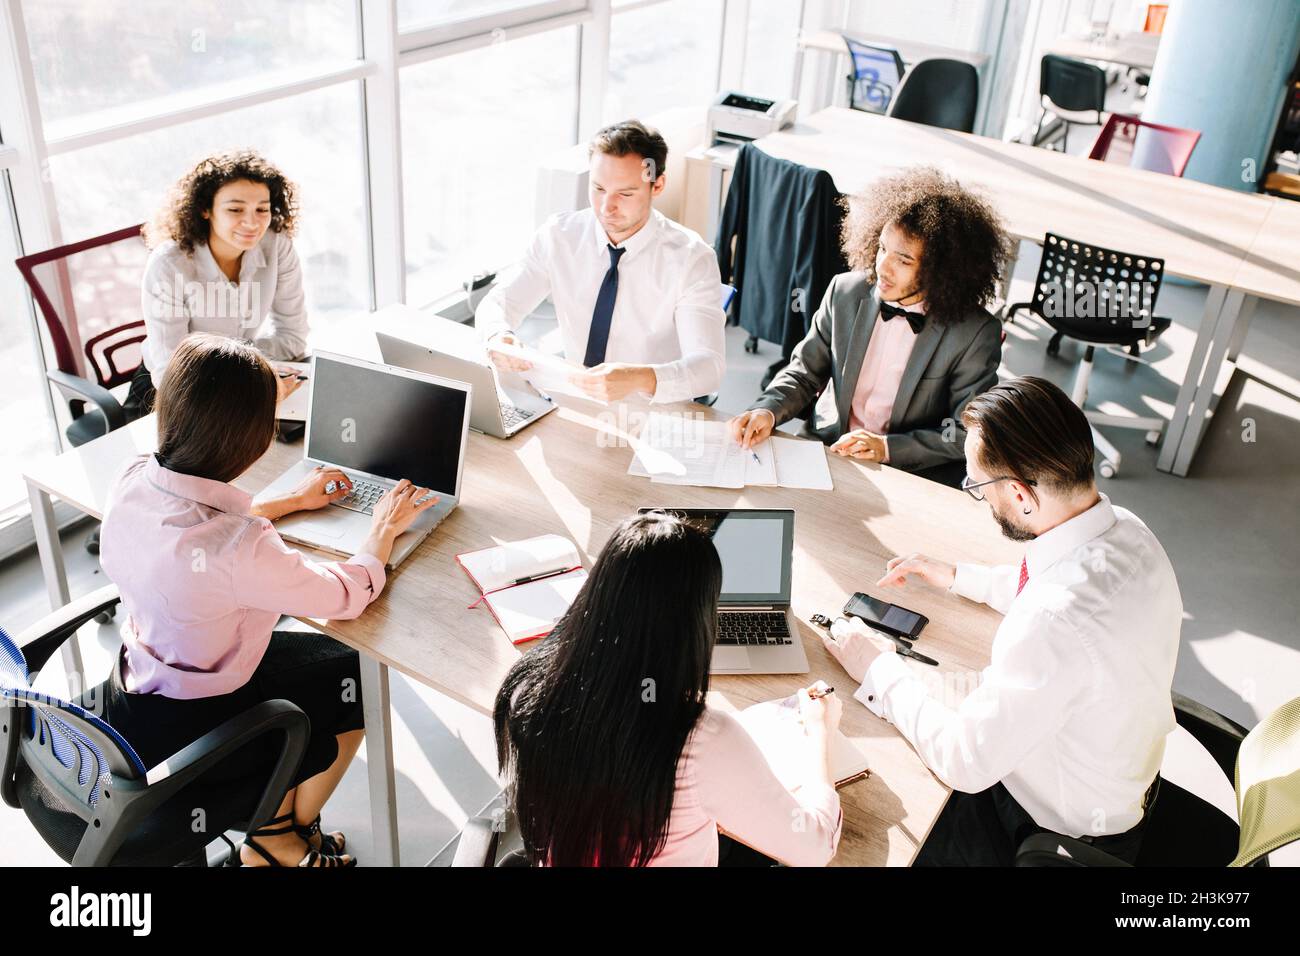 Business consultants working in a team. Stock Photo